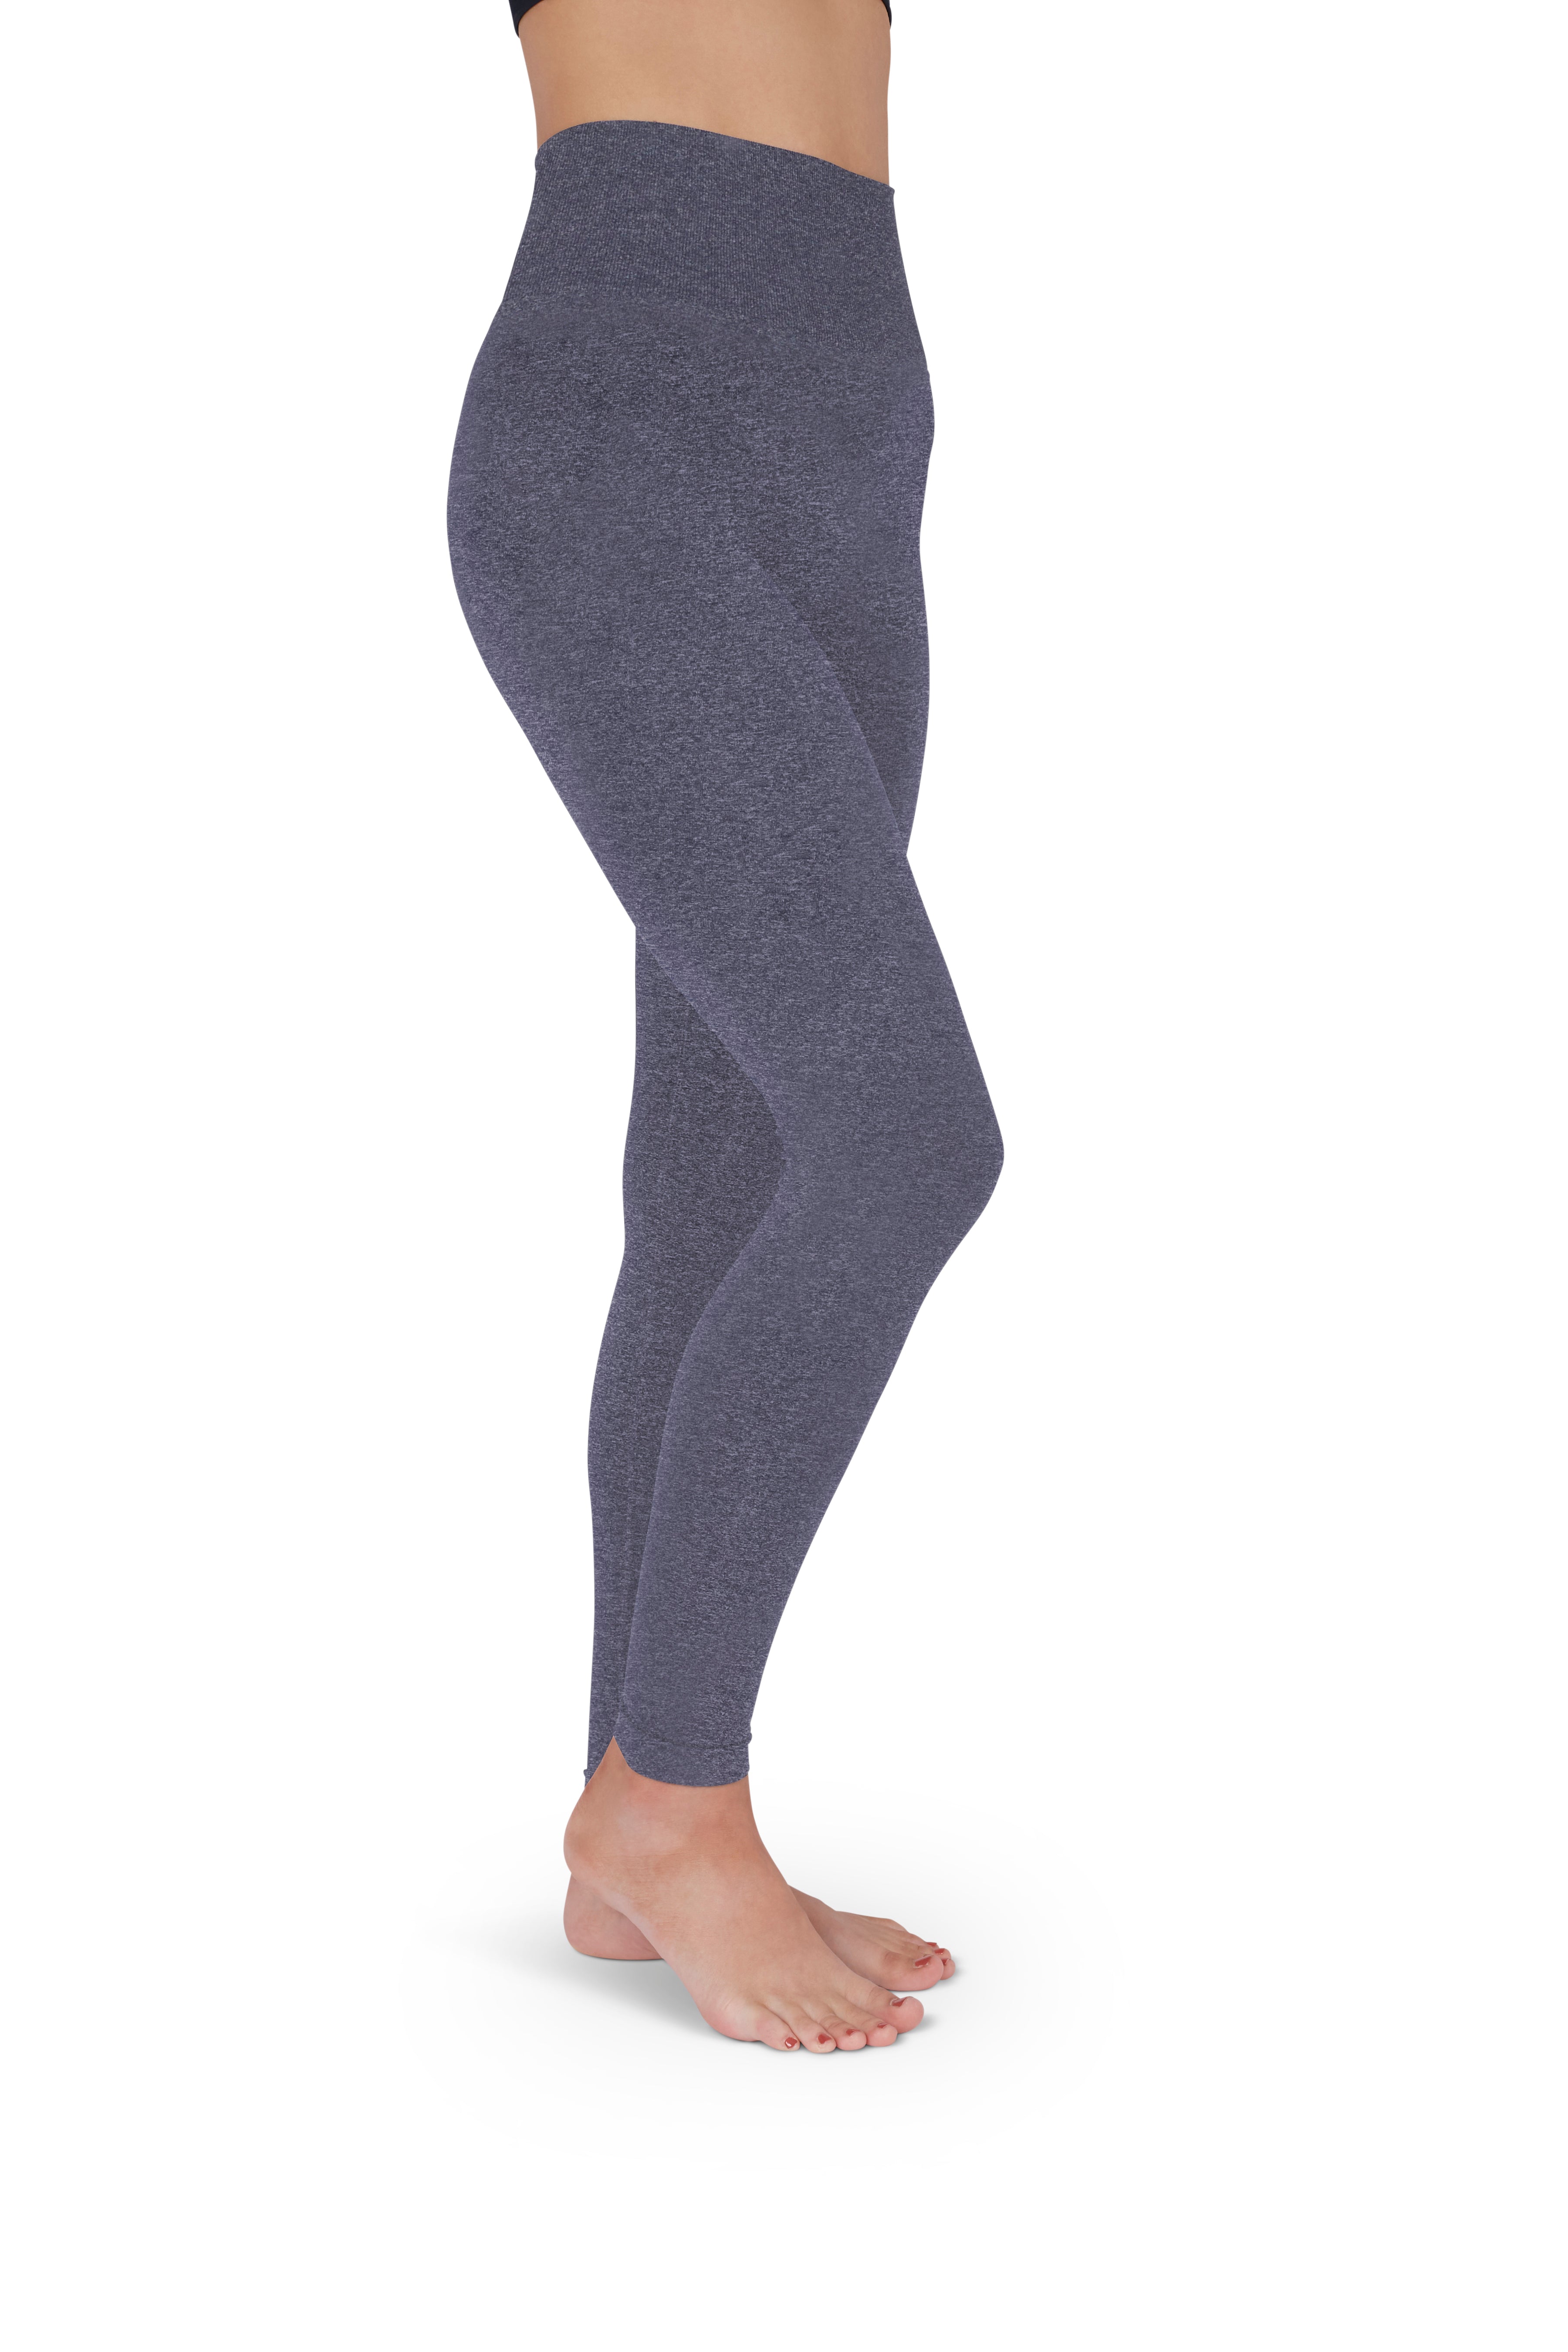 Compression Leggings - Seamless, Footless